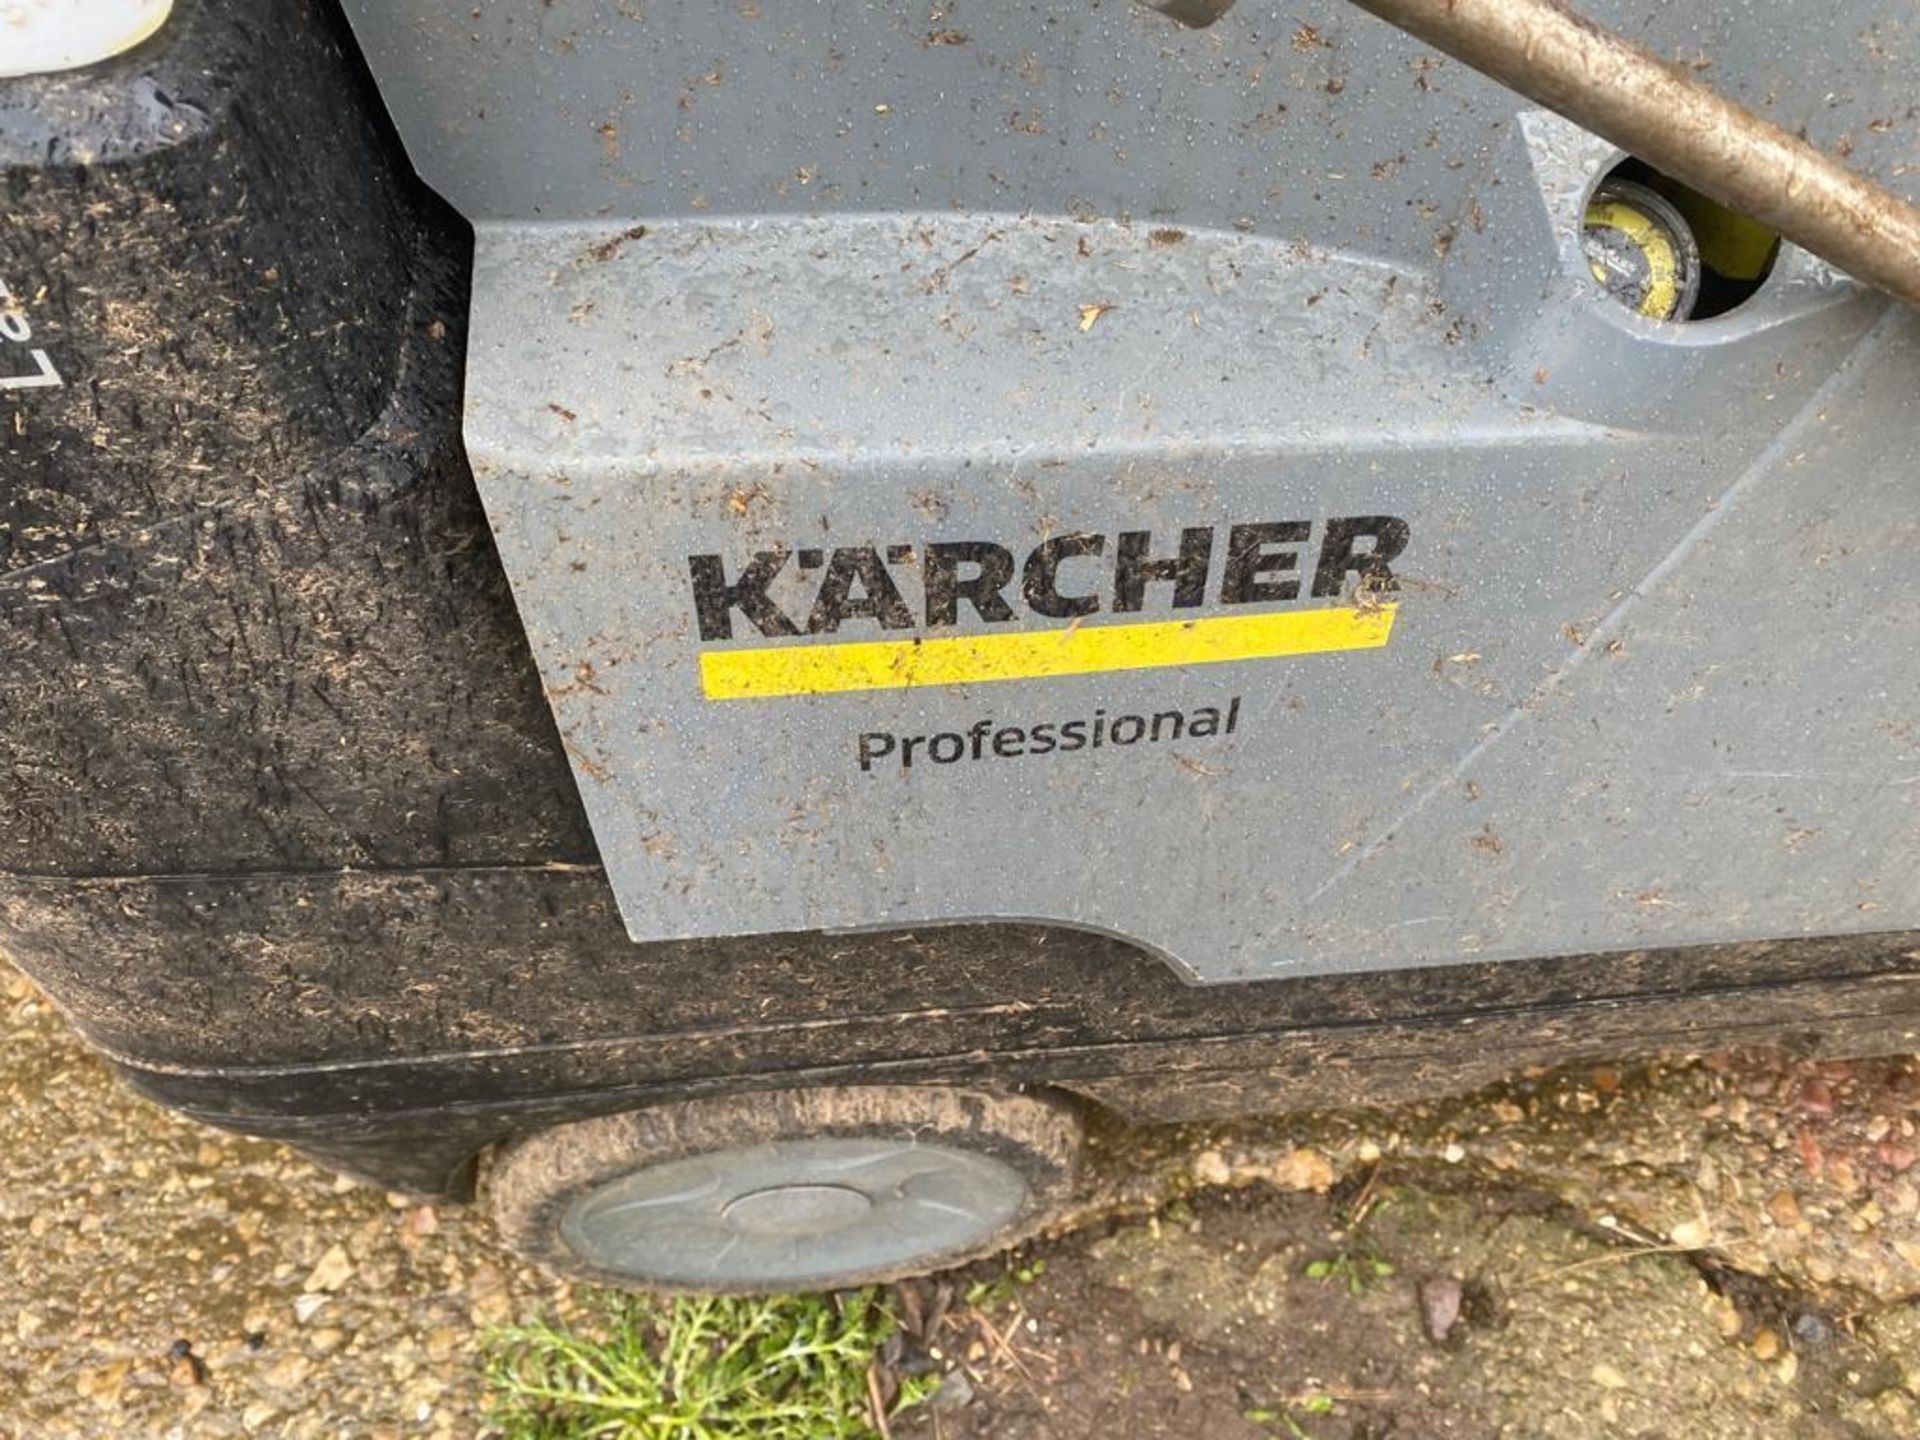 Karcher Professional Power Washer- RM 110 - Image 4 of 9